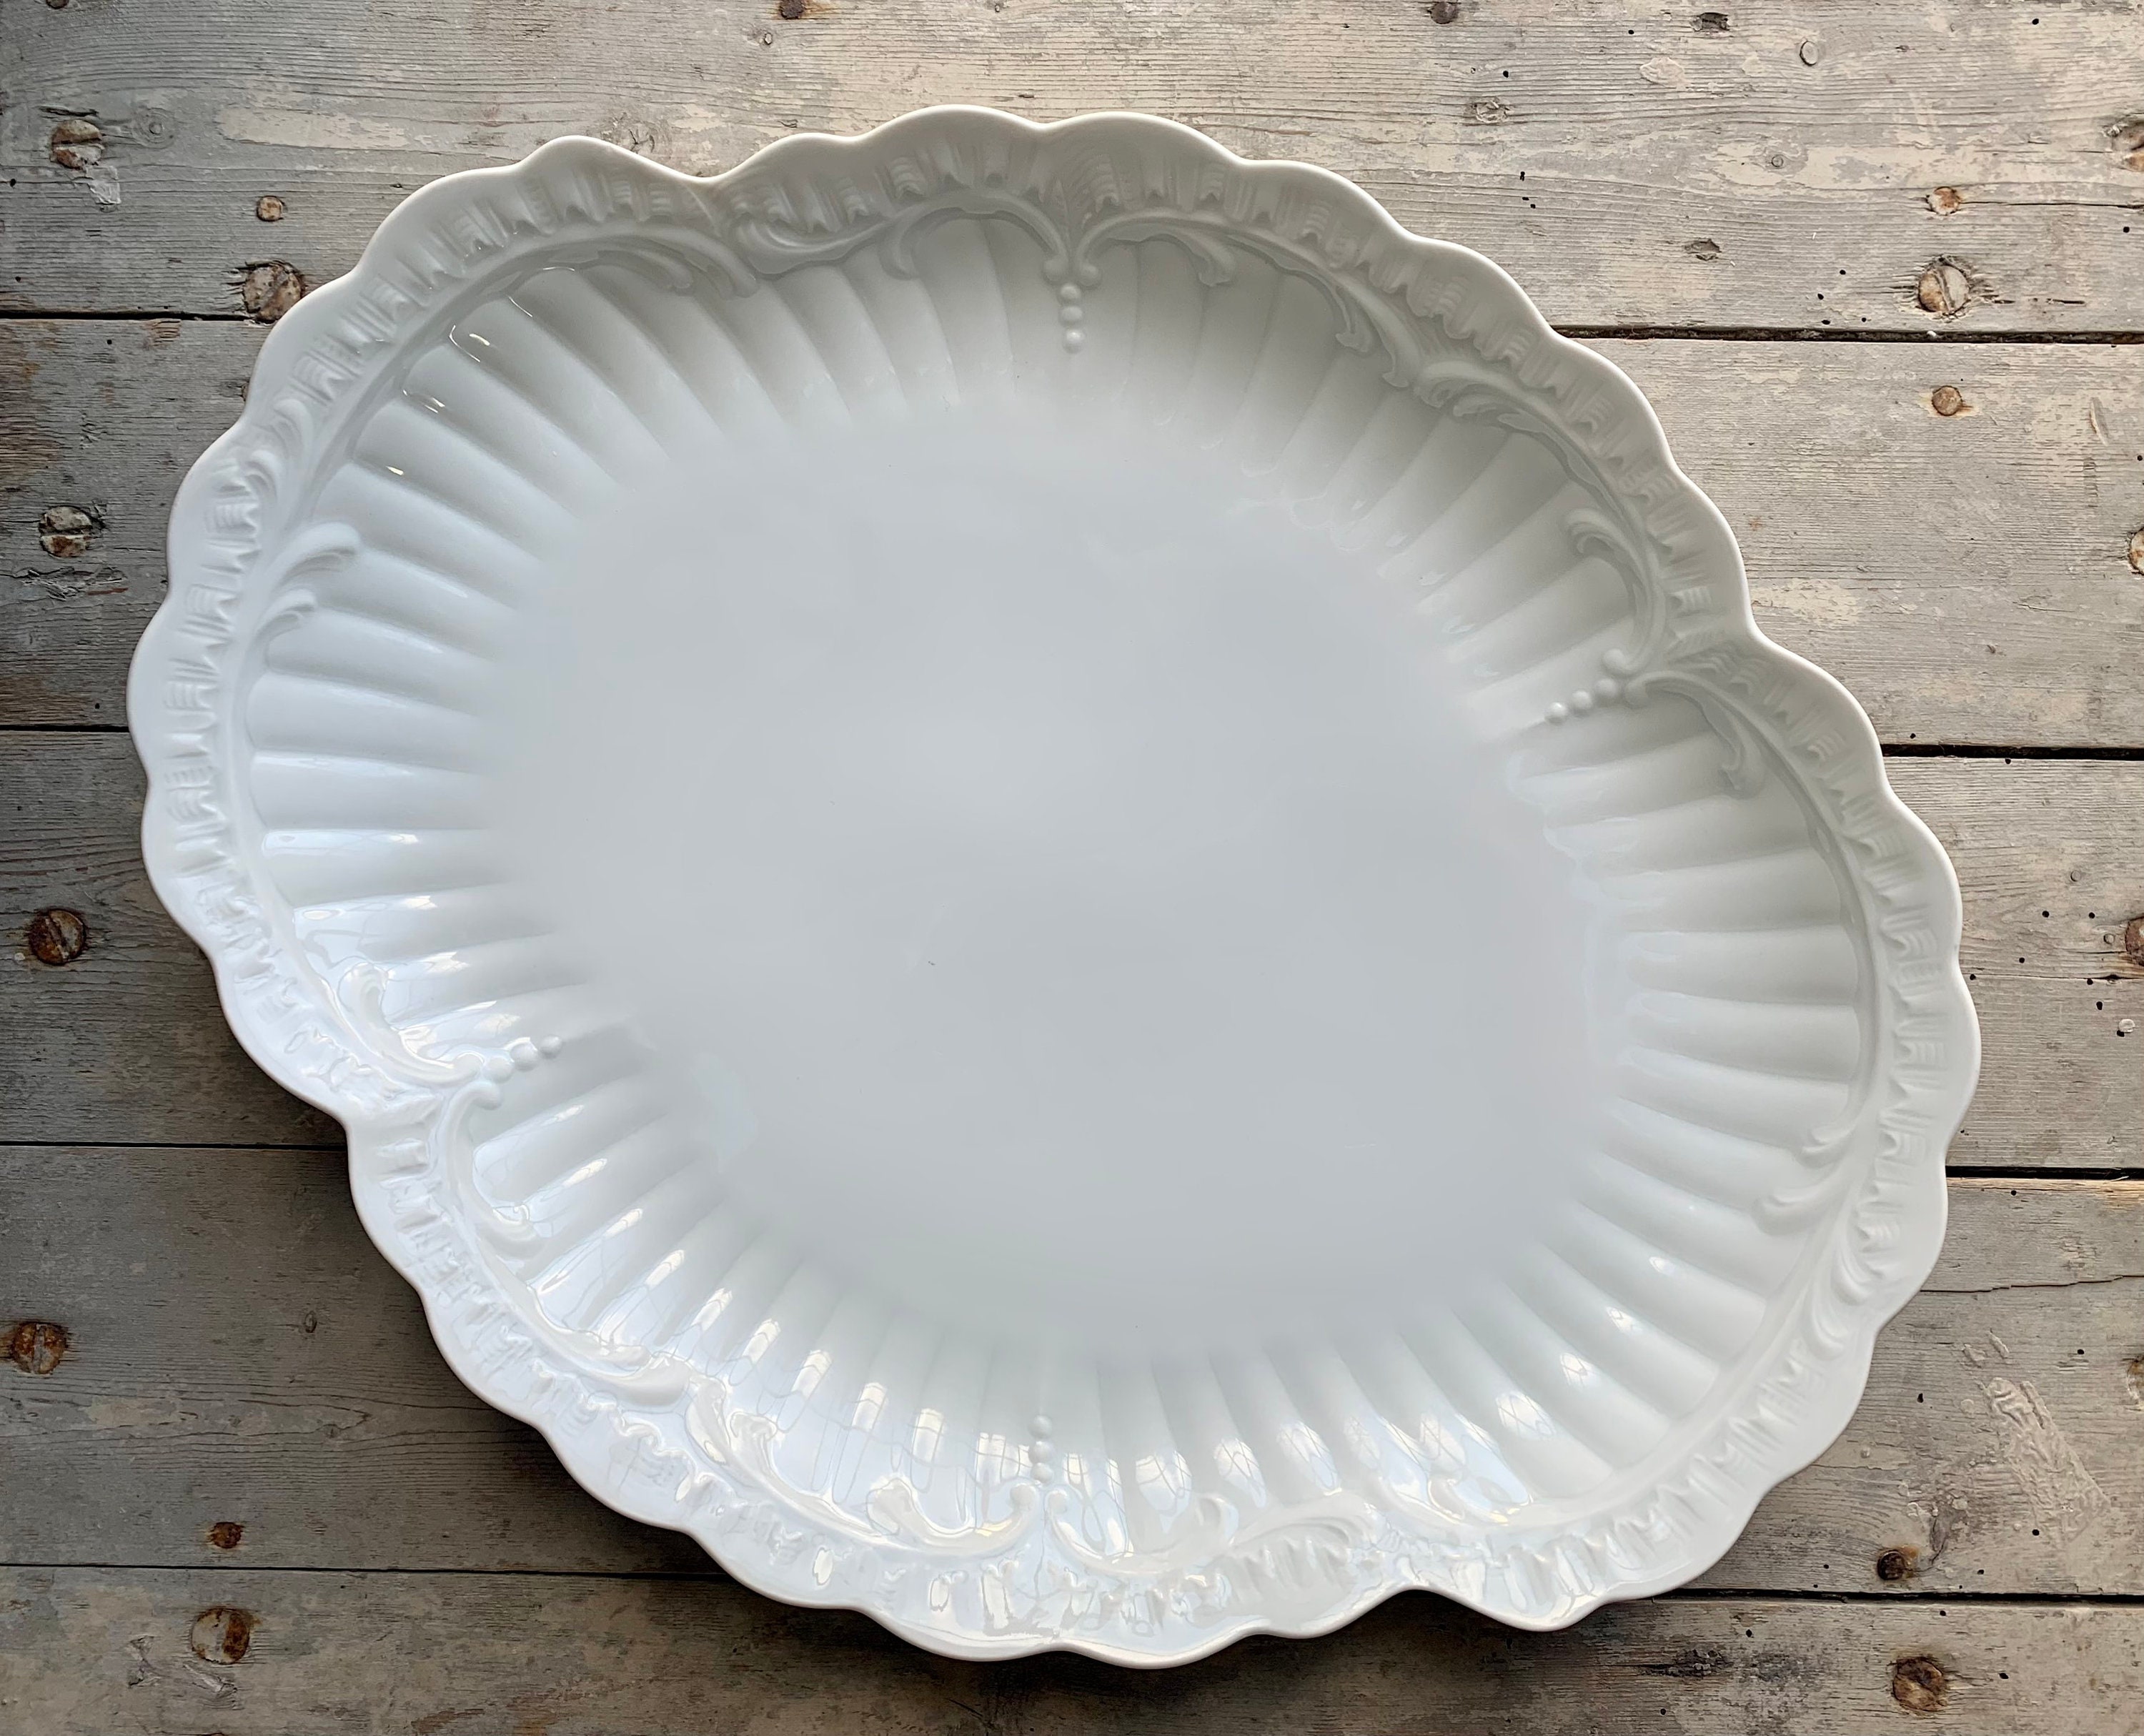 1940S ~ Porcelain Limoges Serving Dishes Made in France By Chastagner White With Pearl Rocail Decora